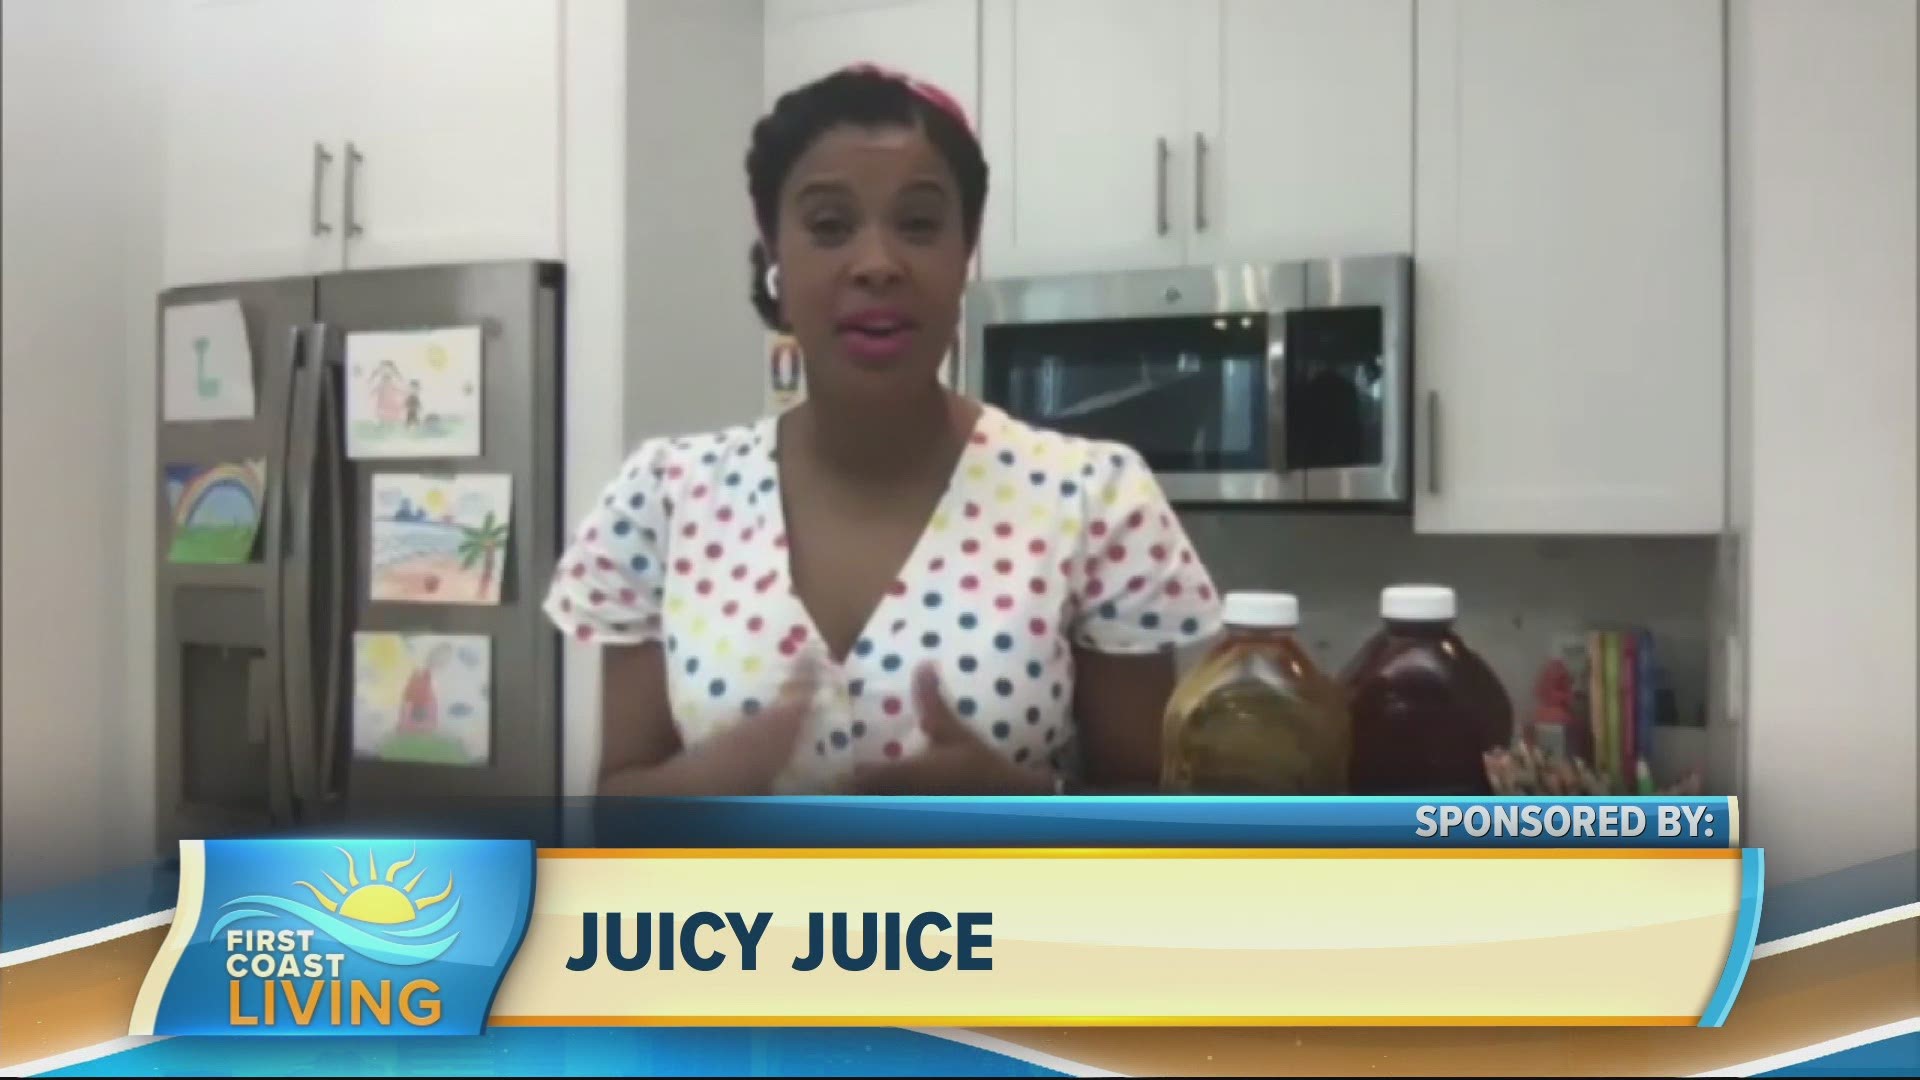 Juicy Juice encourages parents to celebrate their little artists' creativity through nationwide contest offering the chance to be featured on-pack.